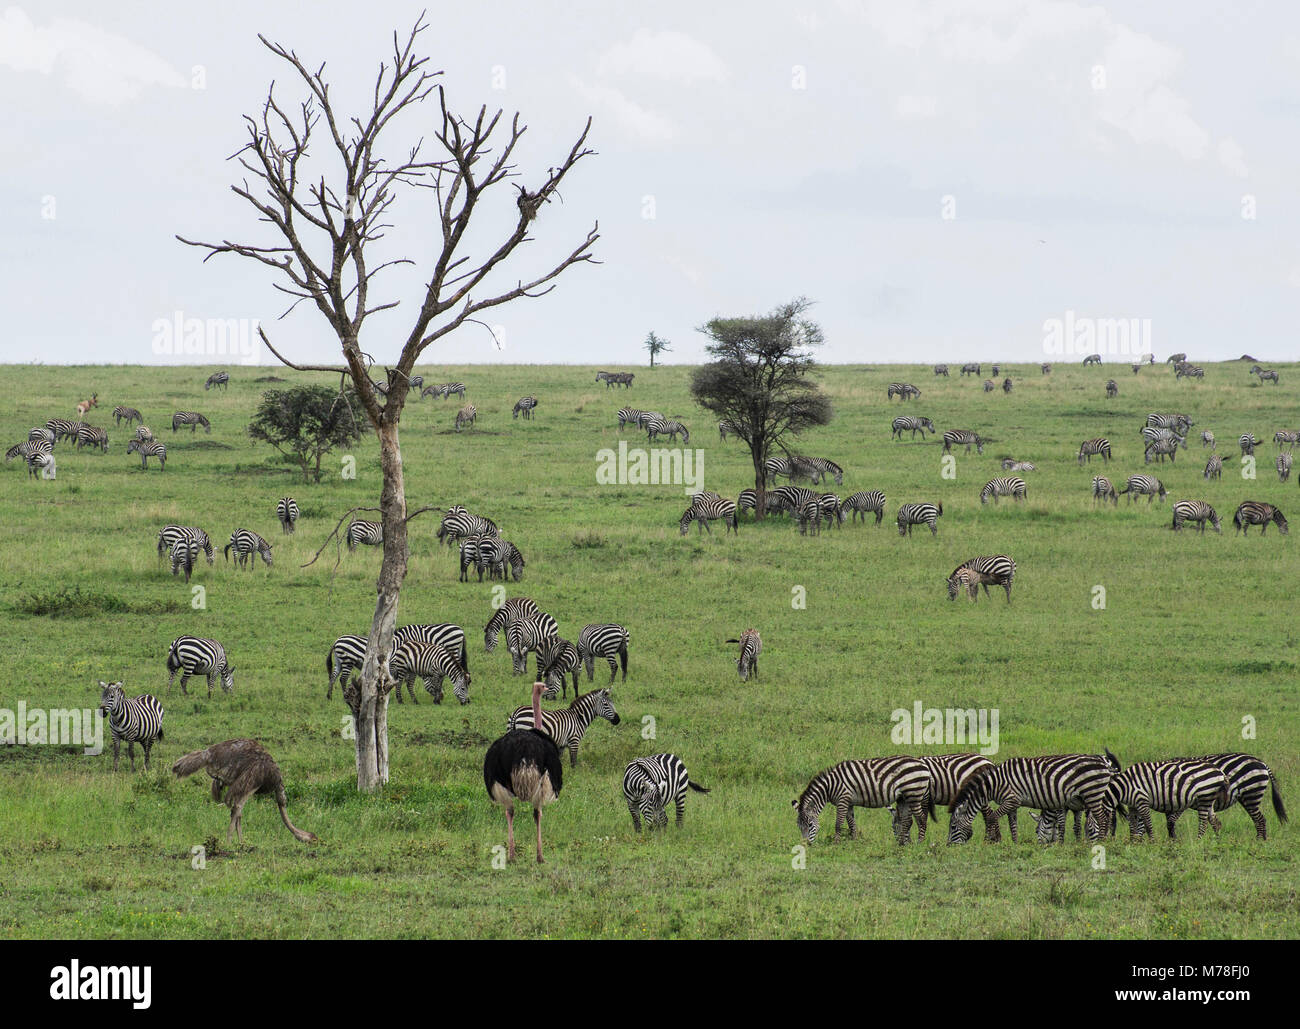 Zebras roaming freely in the Serengeti in northern Tanzania with acacia trees in the background in Nduti Serengetti National Park Arusha Stock Photo